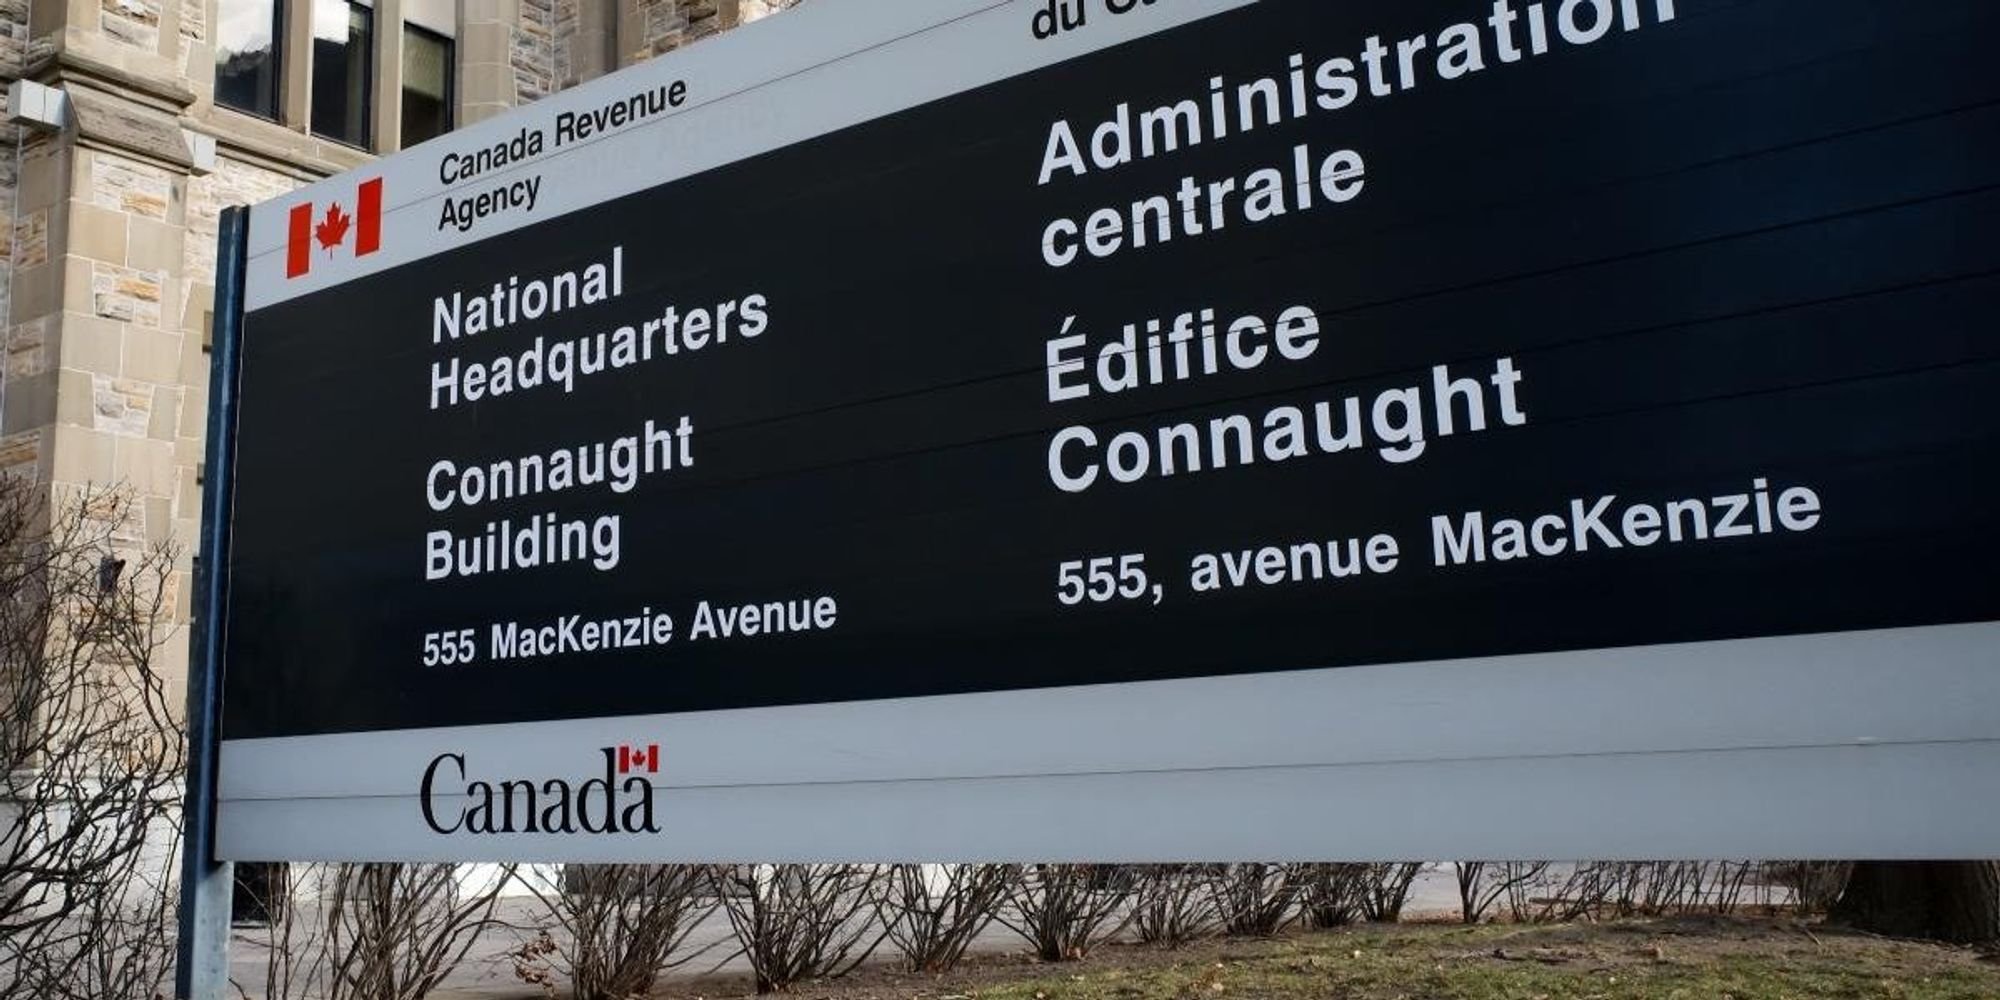 The CRA Is Hiring Auditors The Job Pays Almost $110,000 A Year